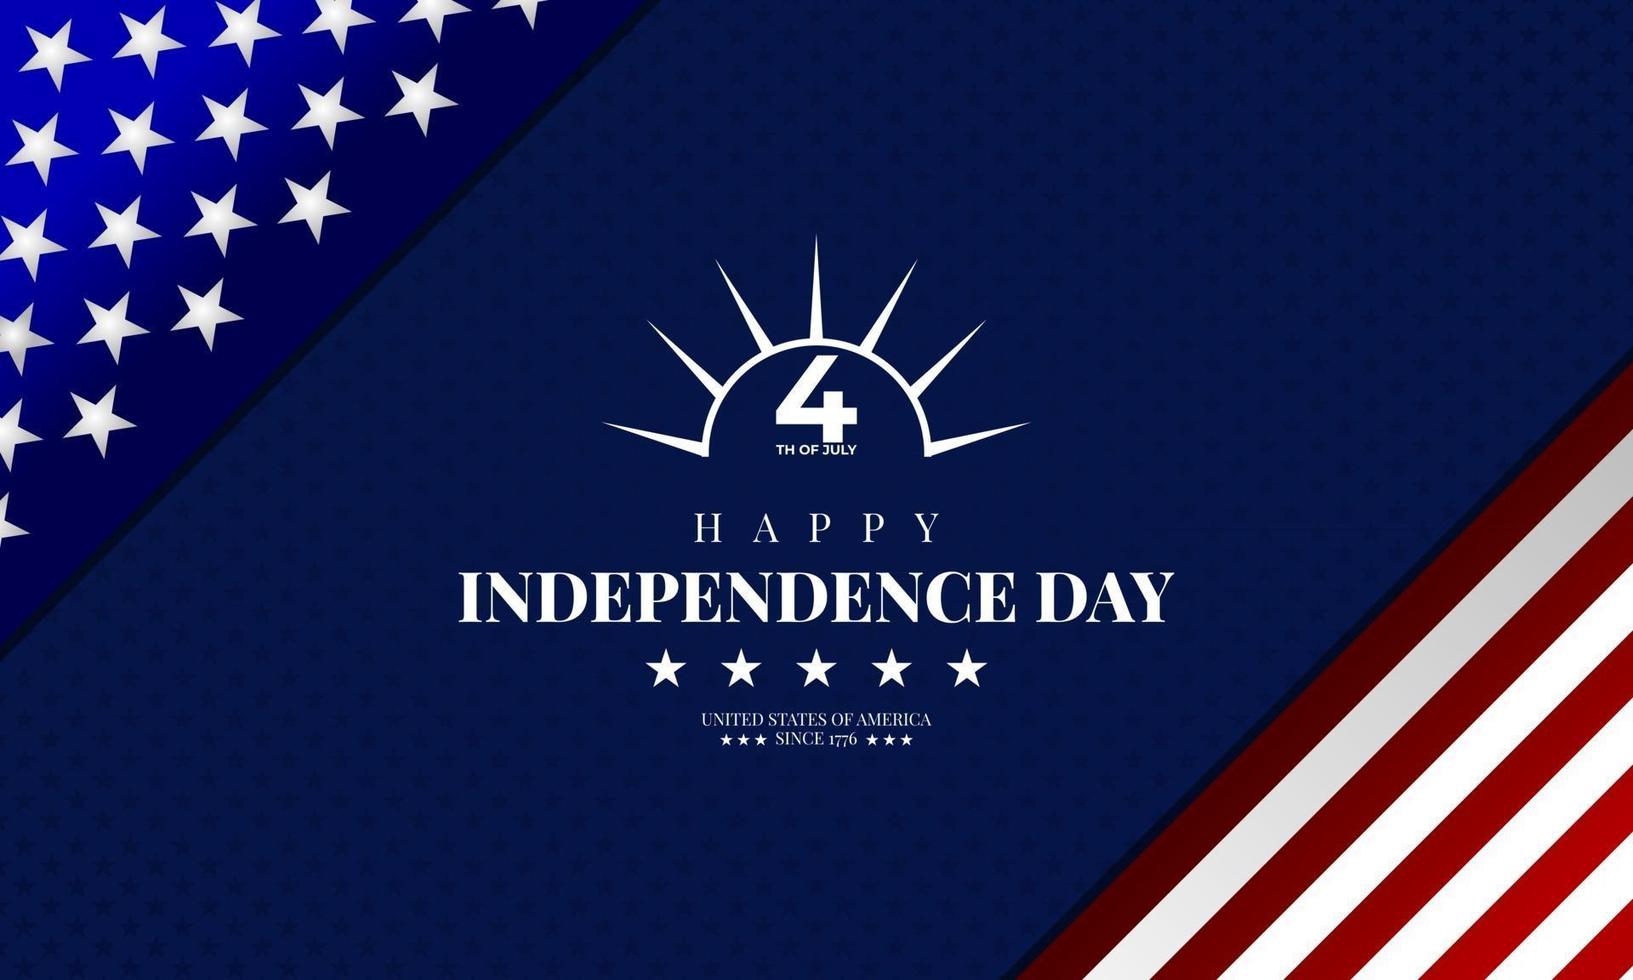 Happy 4th Of July USA Independence Day Background design with US flag vector